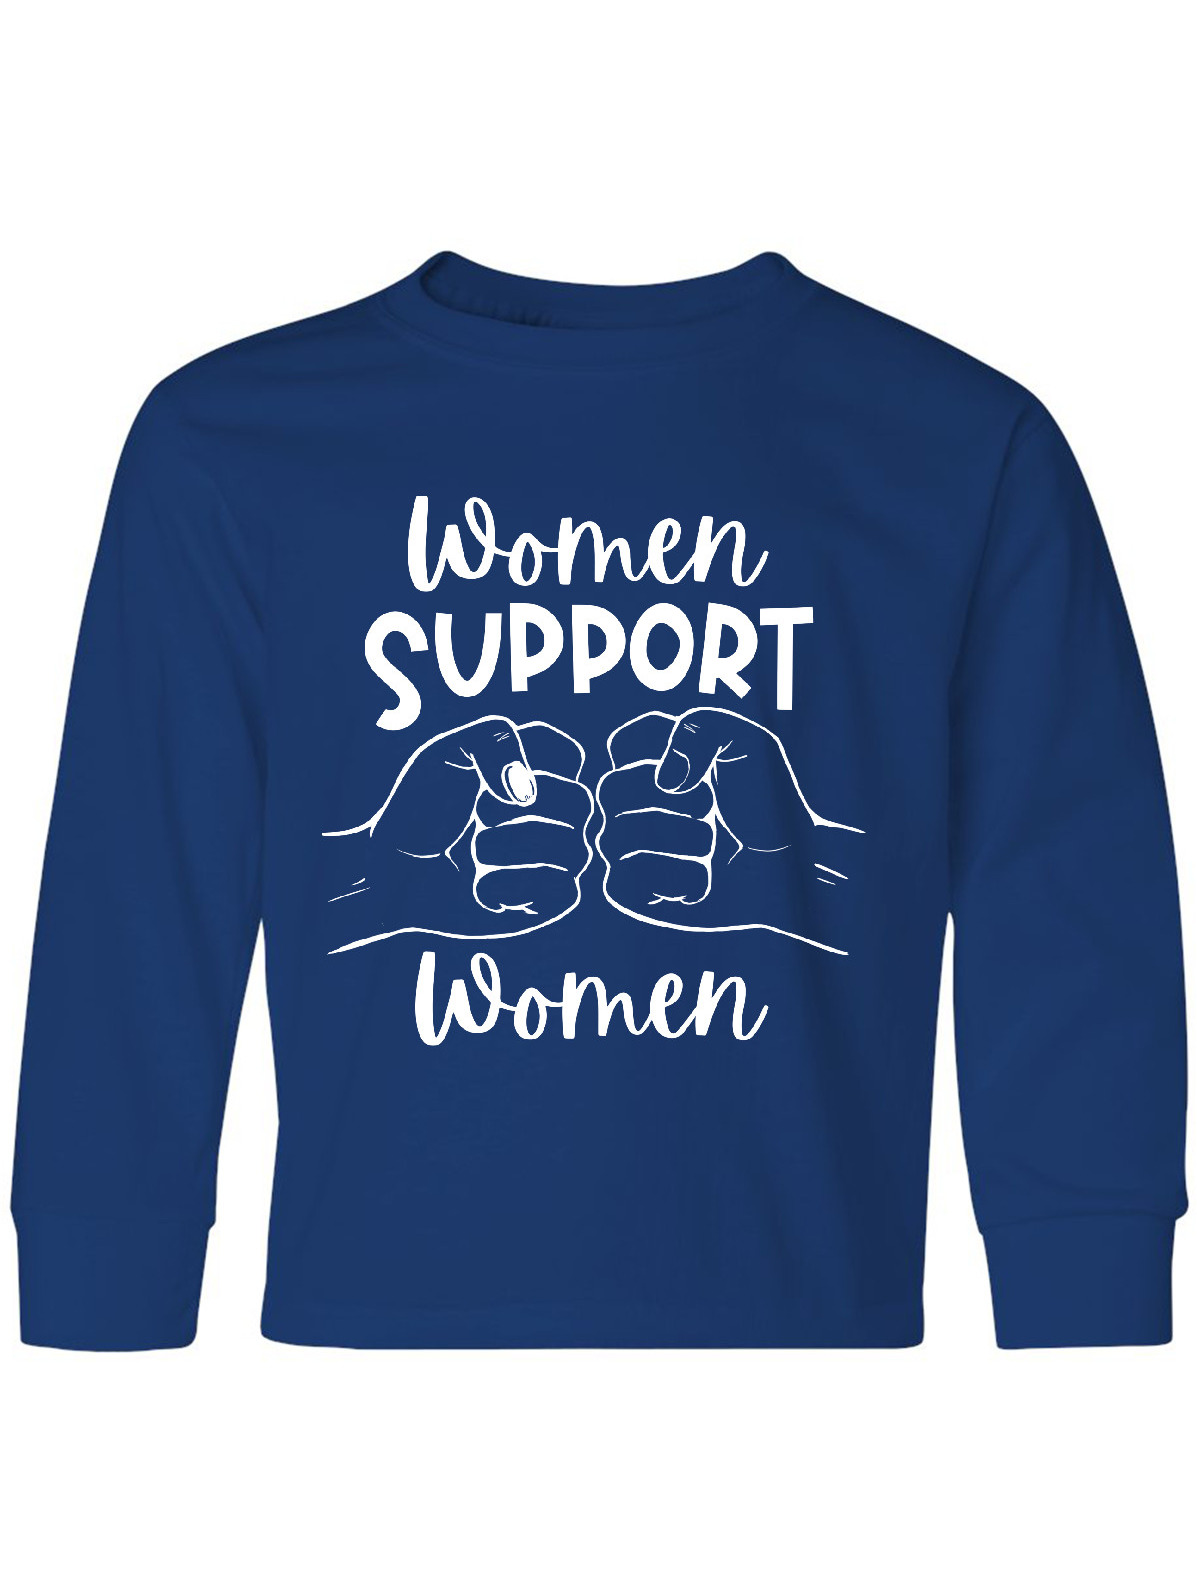 Inktastic Women Support Women Fist Bump Long Sleeve Youth T-Shirt - image 1 of 4